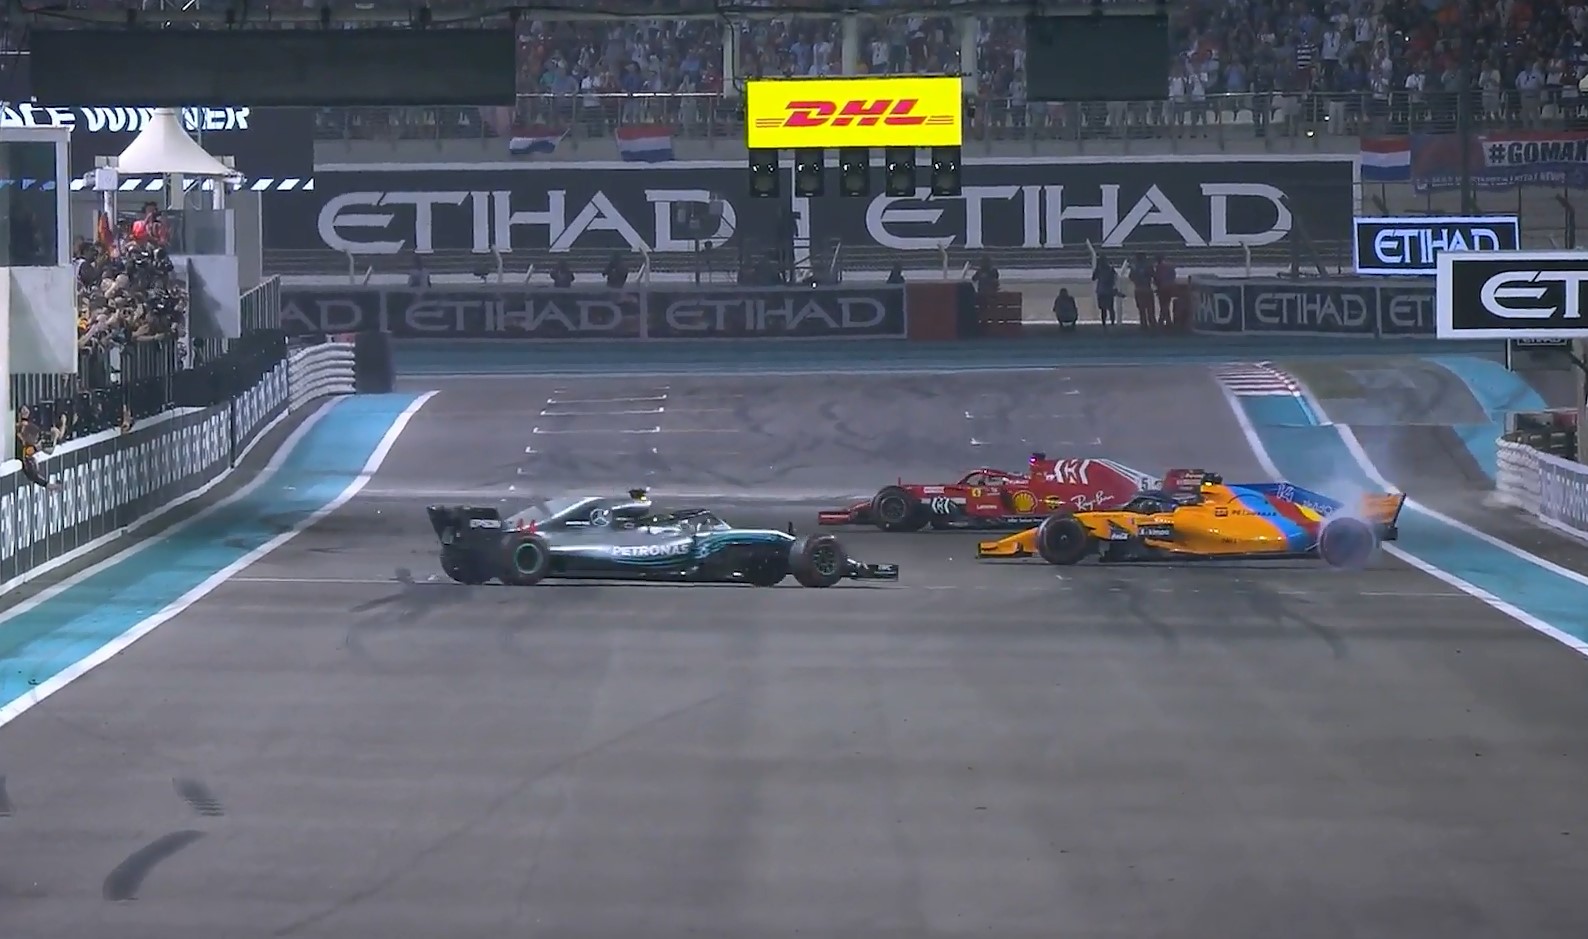 Hamilton, Vettel and Alonso do simultaneous donuts on the pit straight after the race